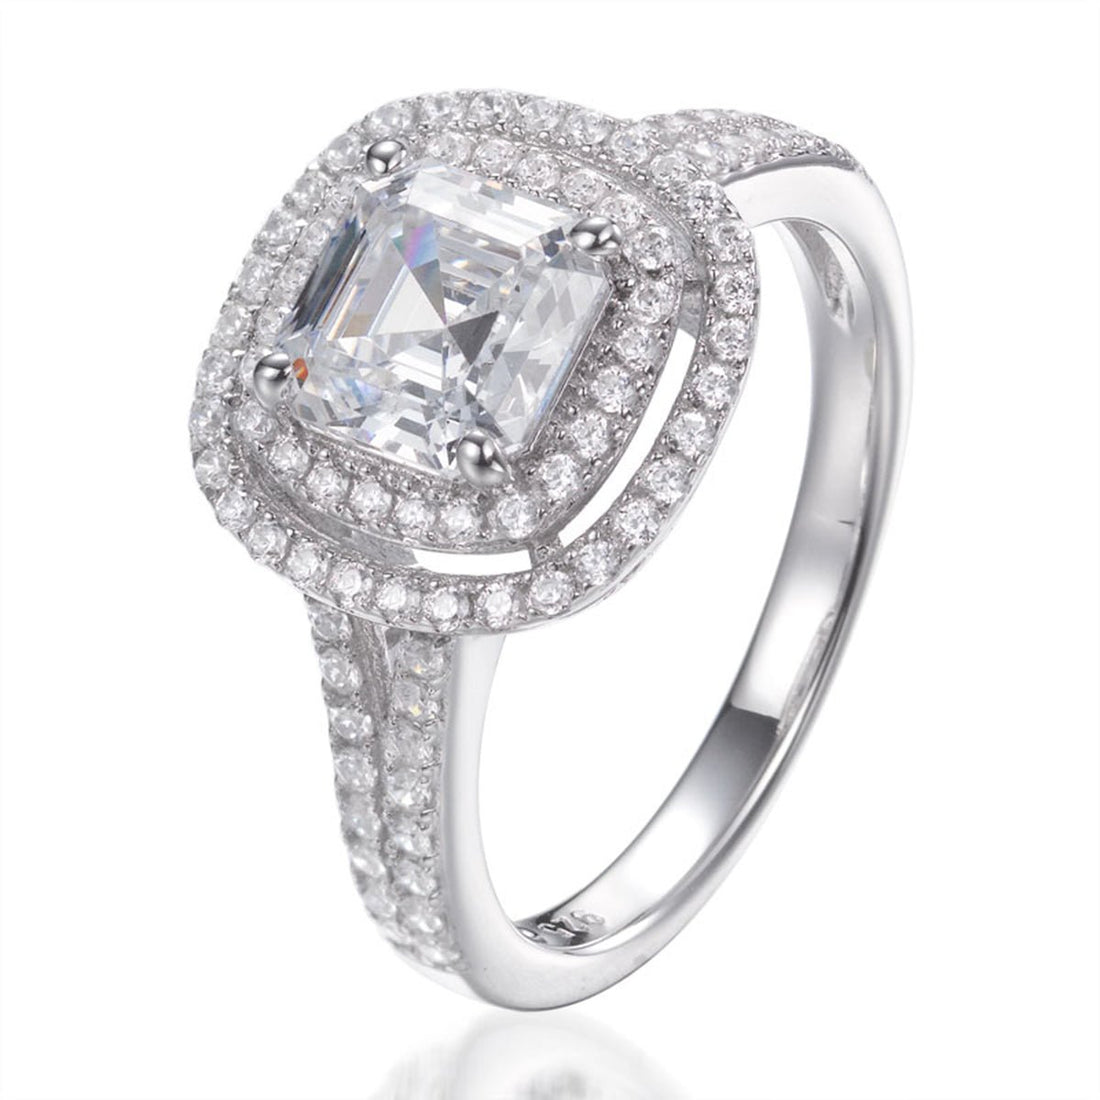 2.85ct Cubic Zirconia Double Halo Asscher Cut Ring in Rhodium Plated Silver